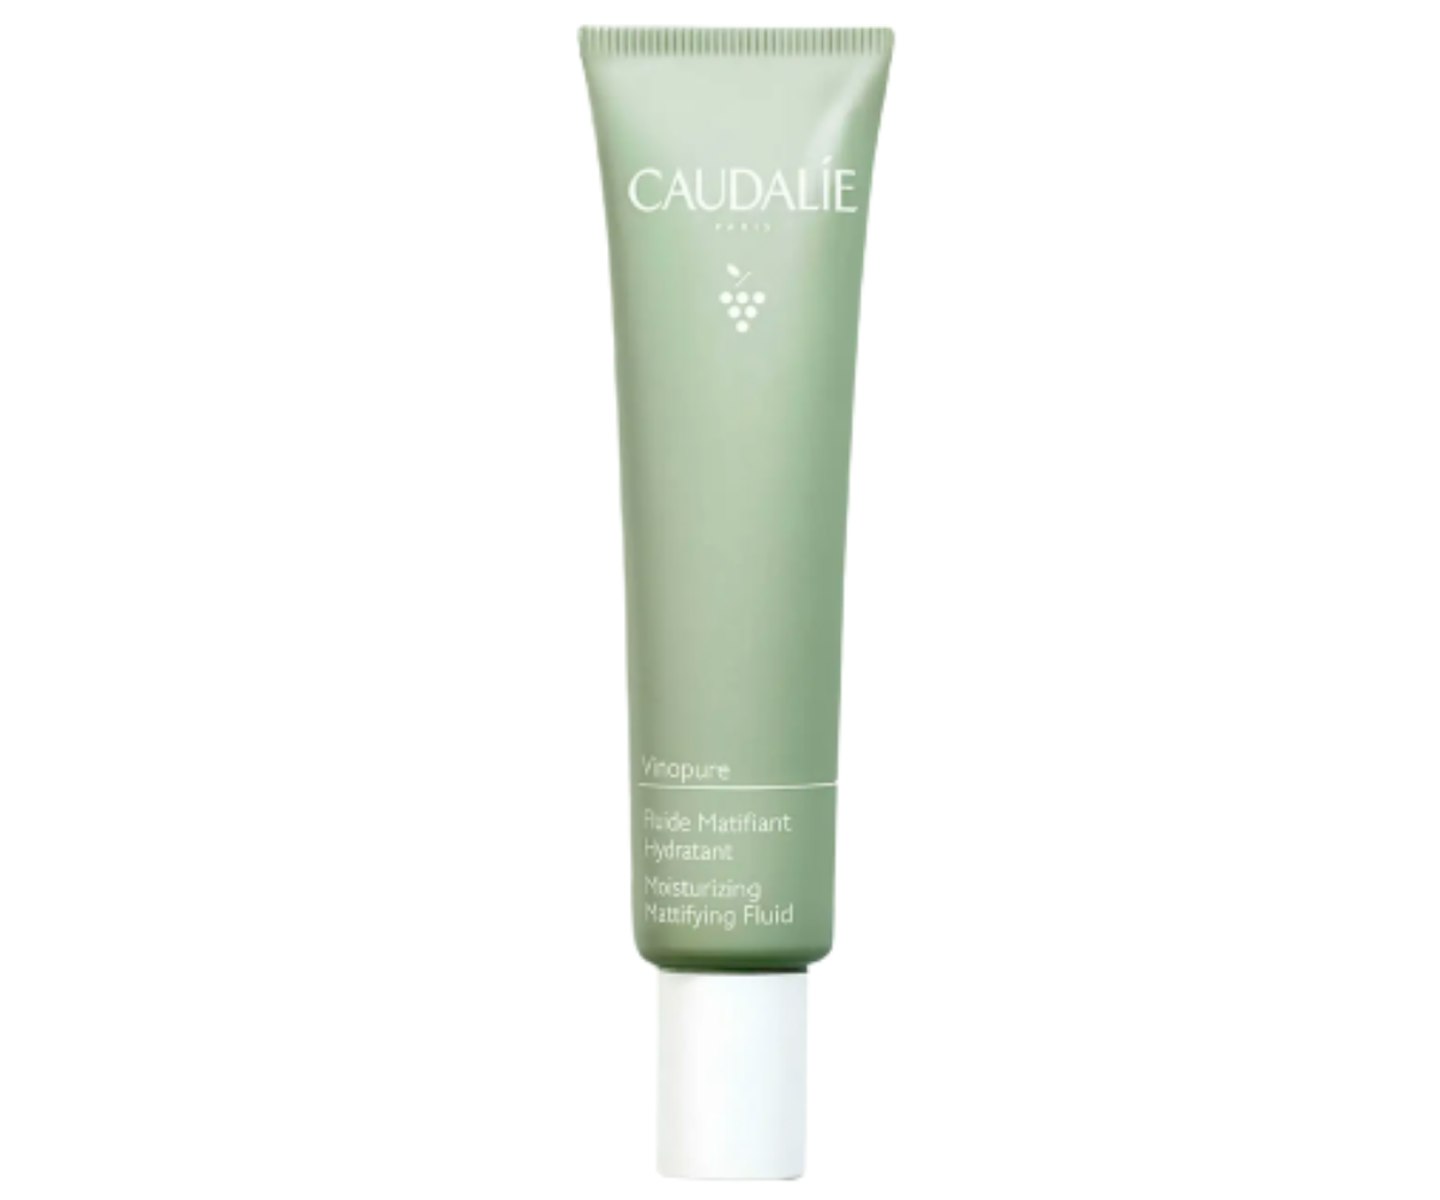 A picture of the Caudalie Vinopure Mattifying Fluid